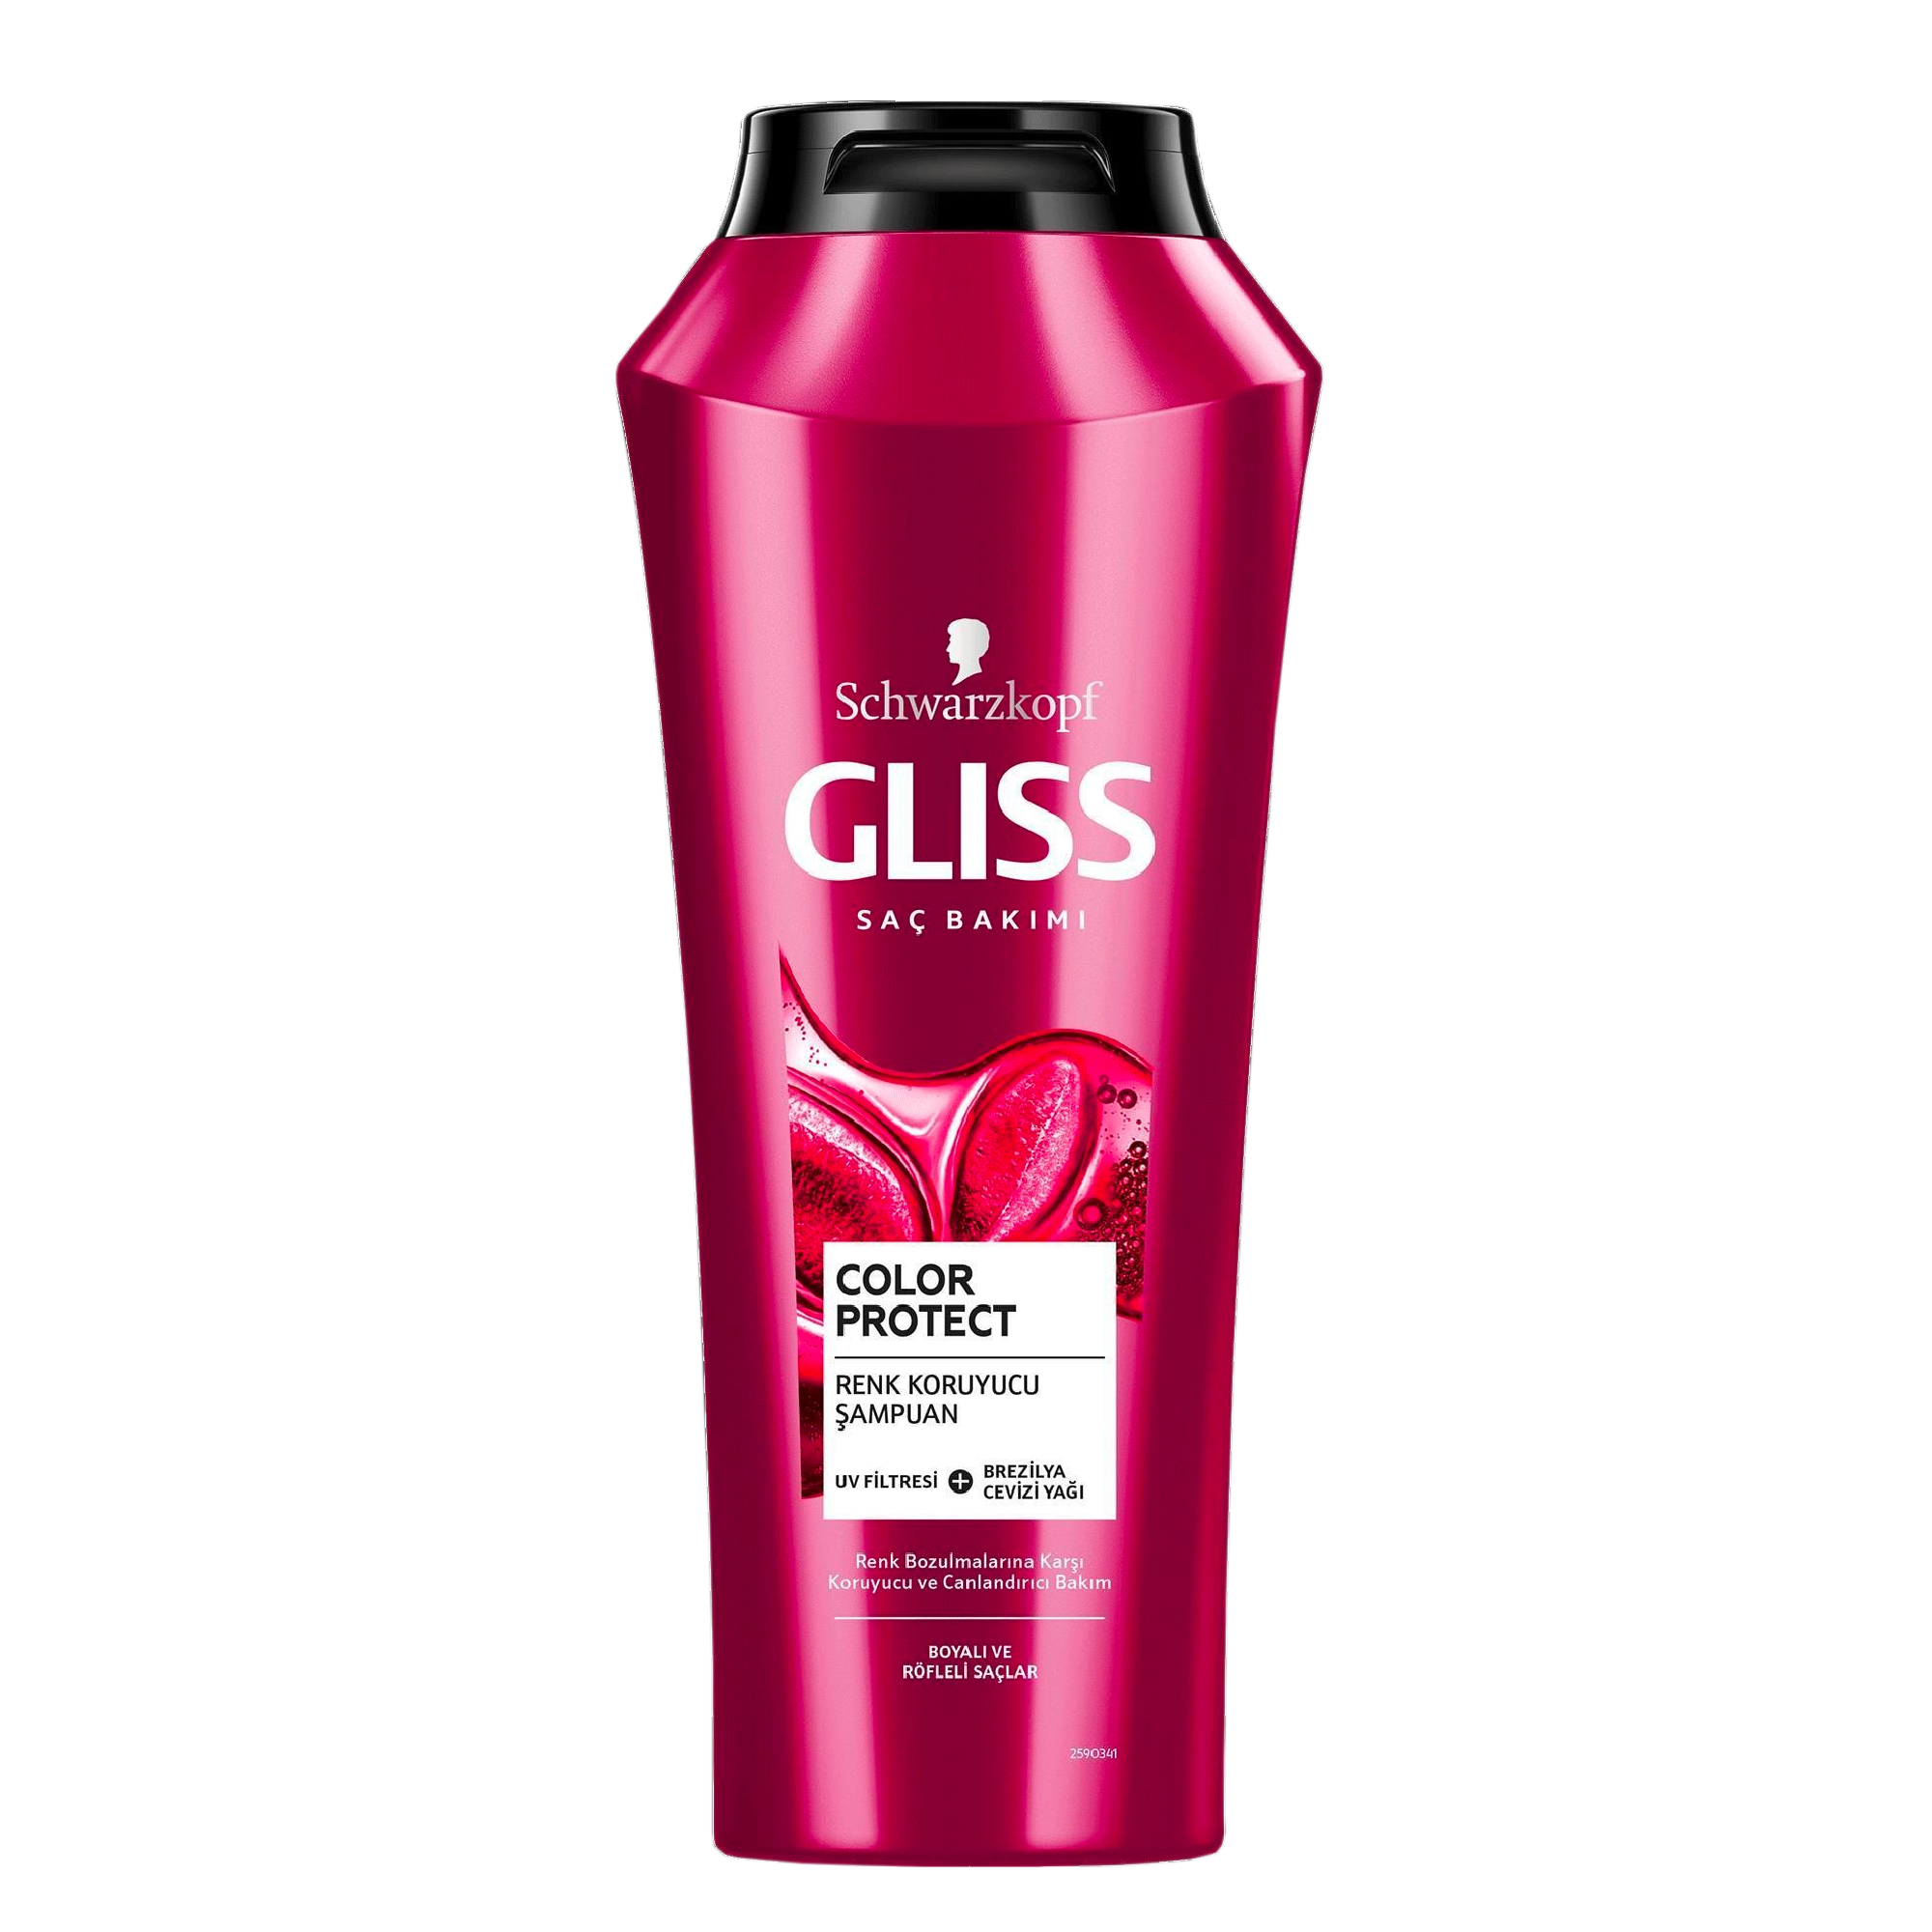 Gliss Şampuan Color Protect 500 Ml 8690572798638